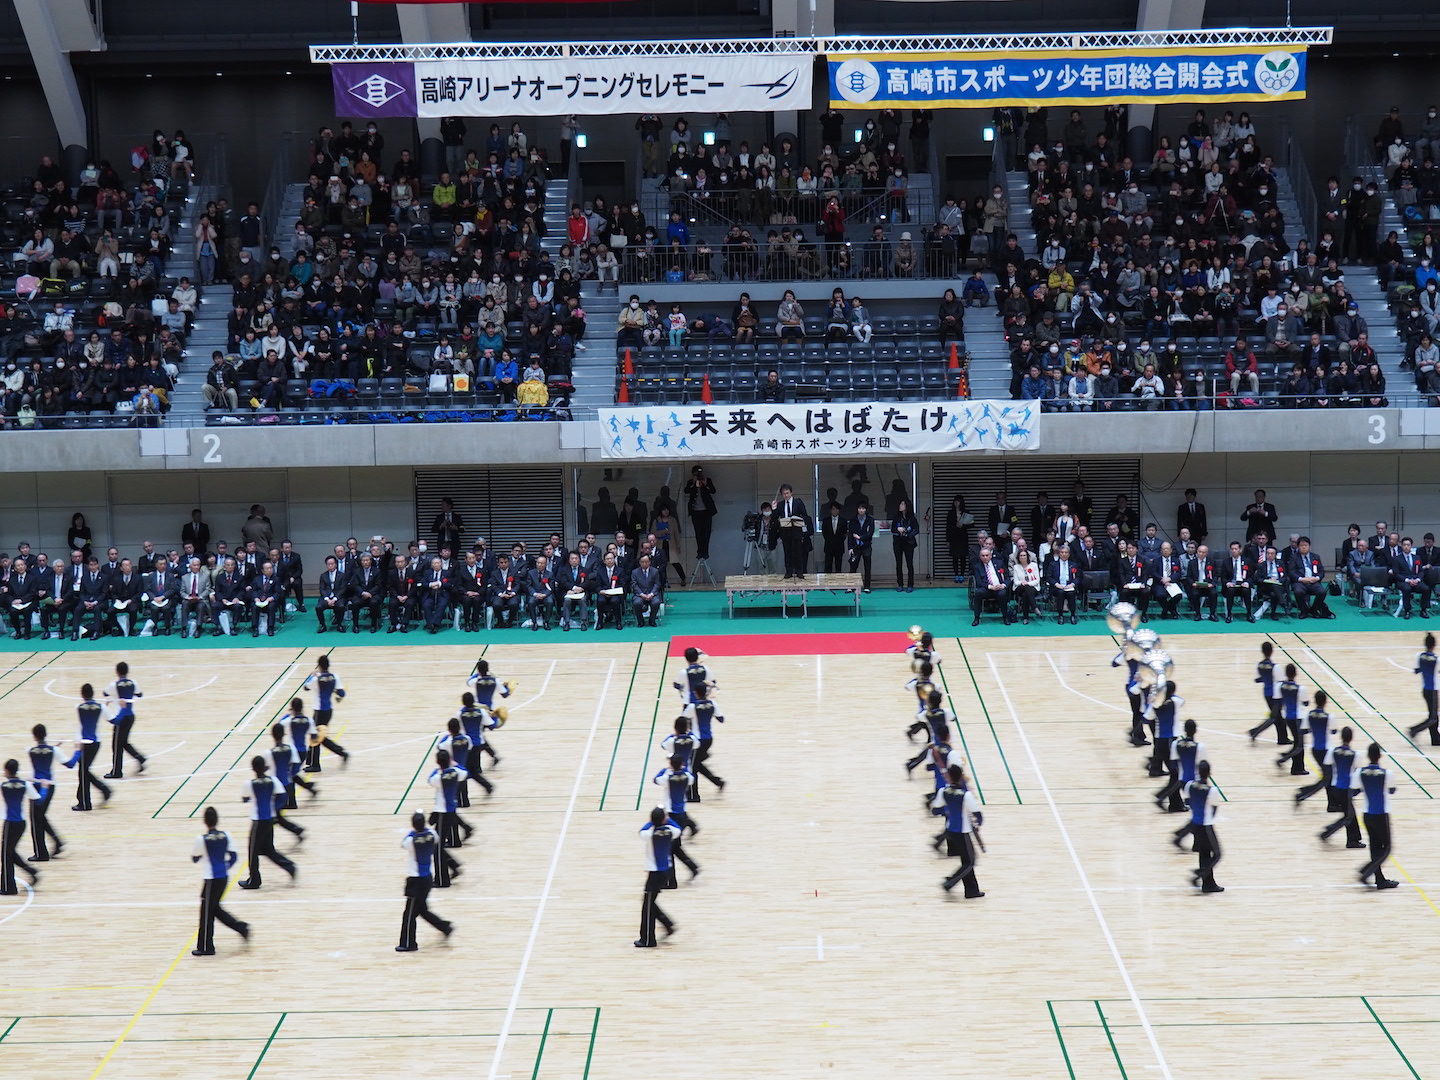 Takasaki Arena Opening Ceremony<br />Performed by<br />The Tsukasawa Junior High School Marching Band 5